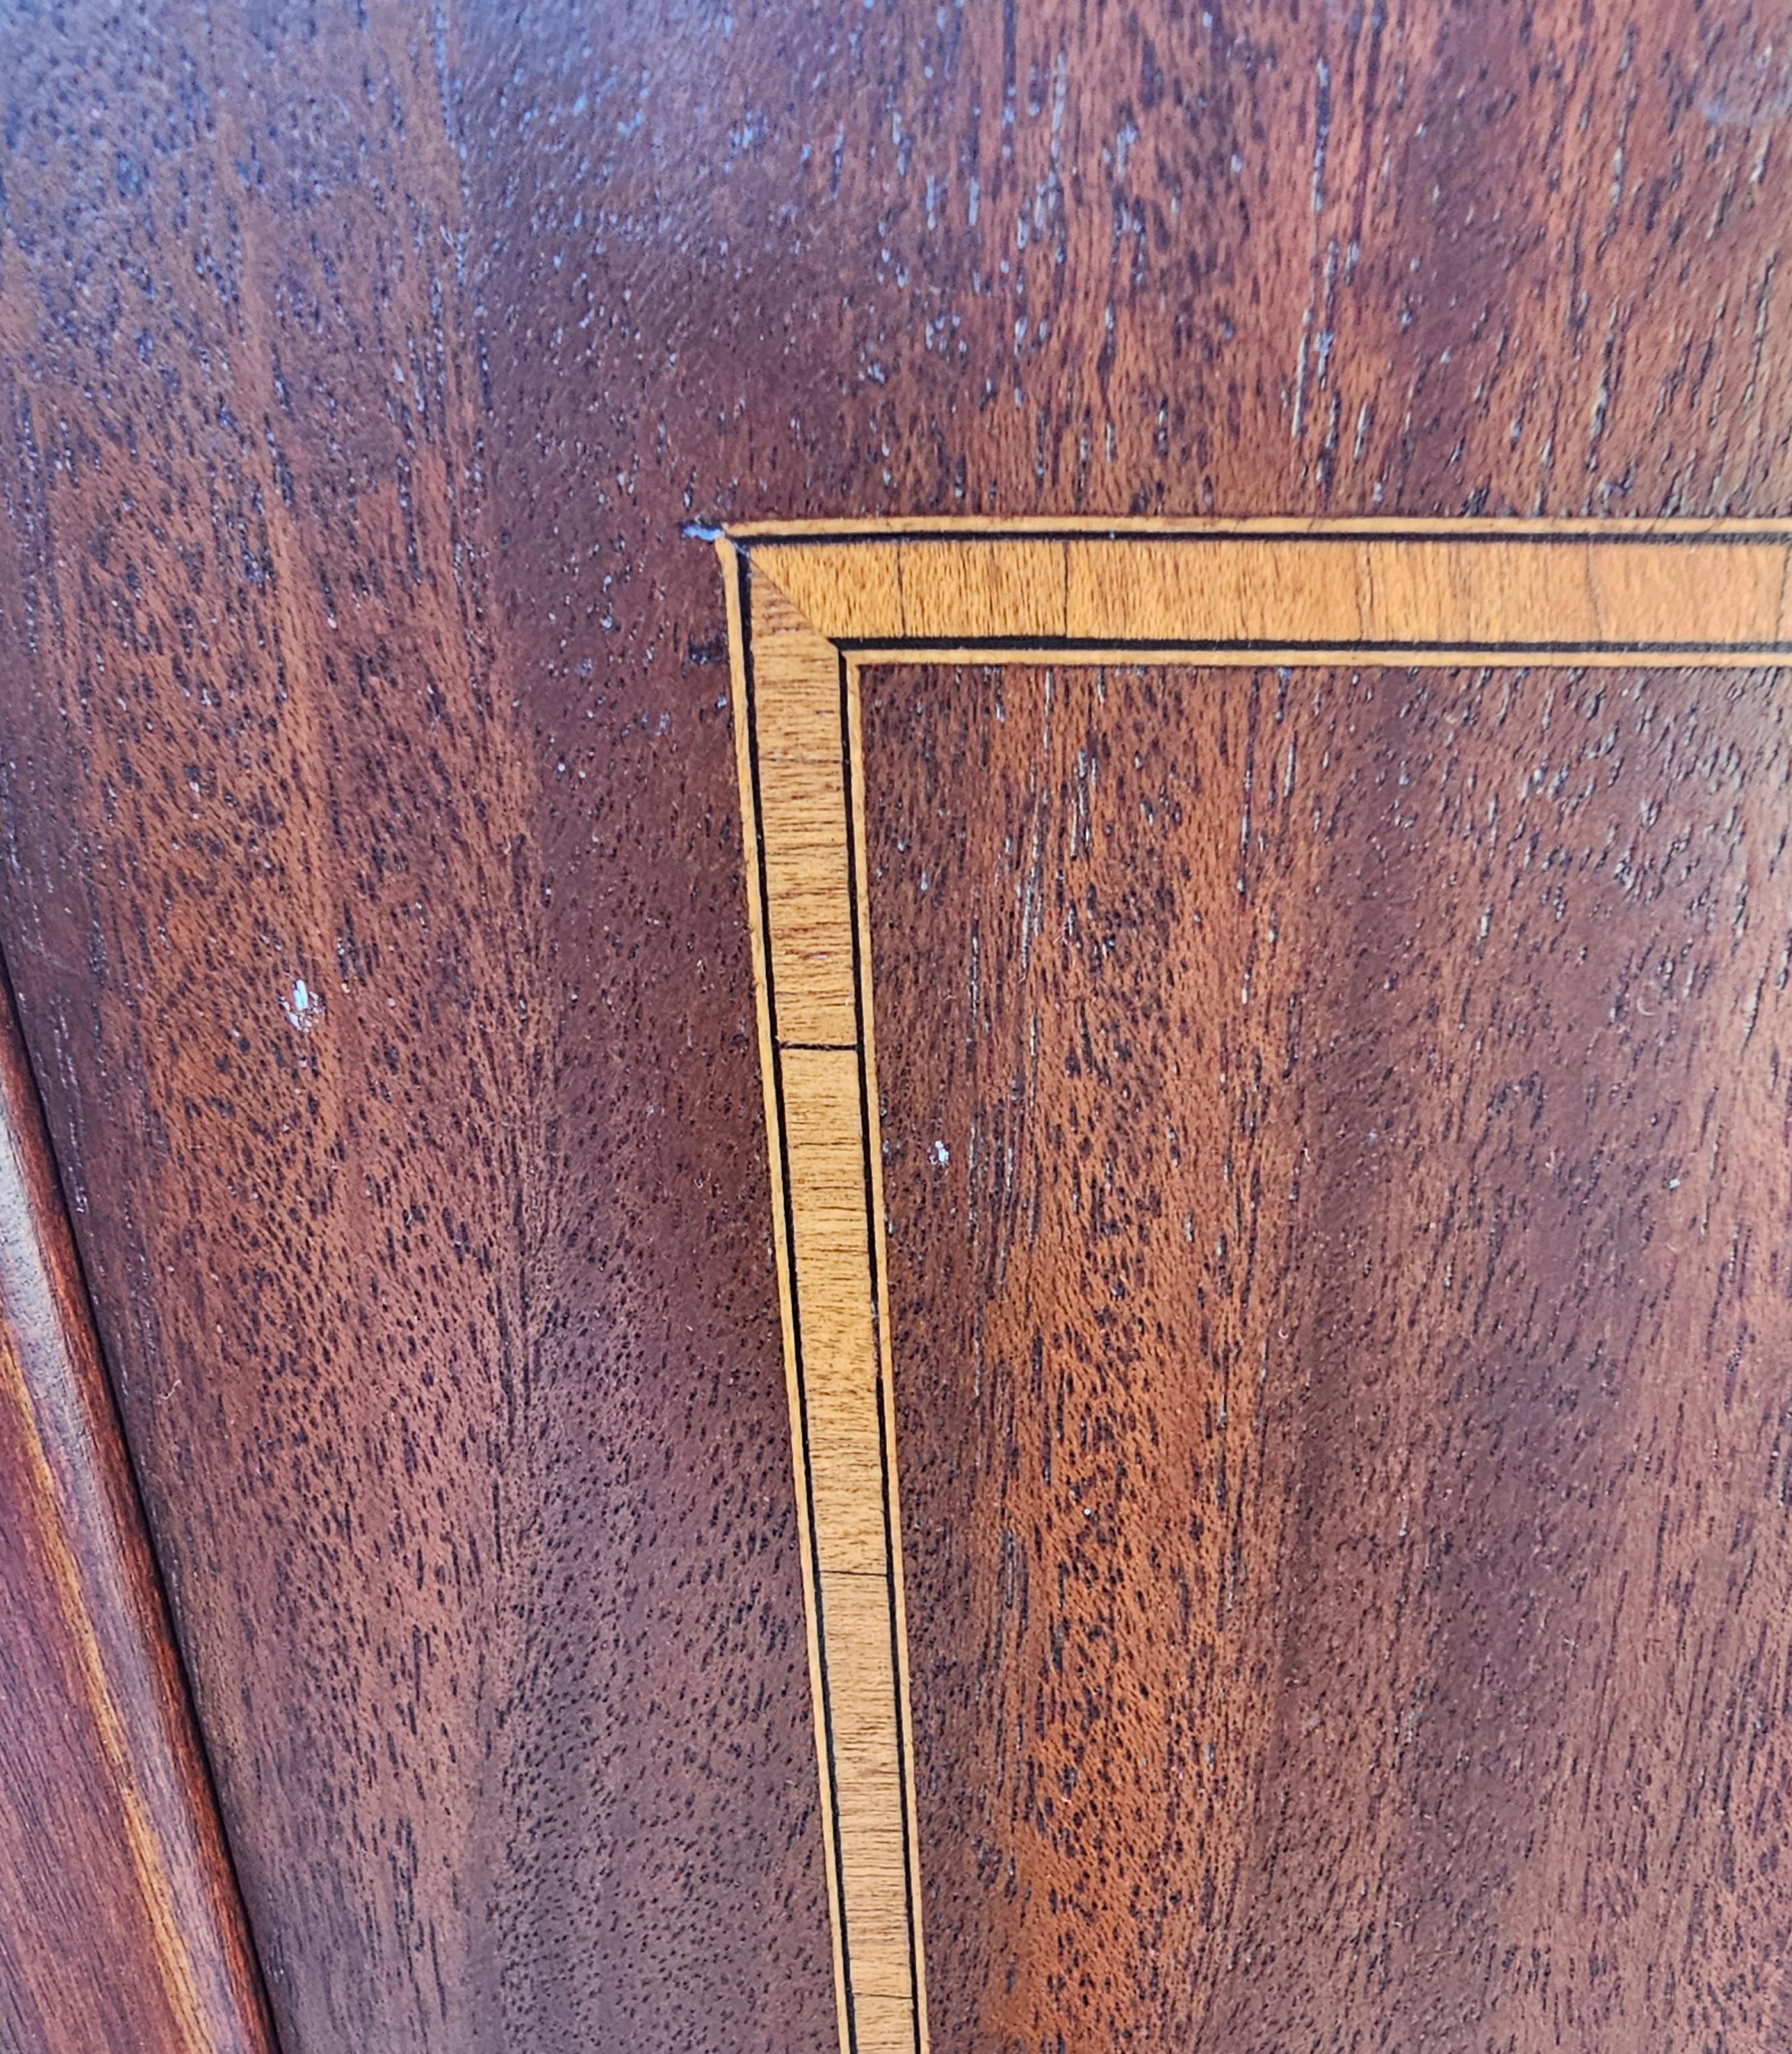 20th Century 1930s Refinished Edwardian Mahogany and Satinwood Inlaid Sheet Music Cabinet For Sale